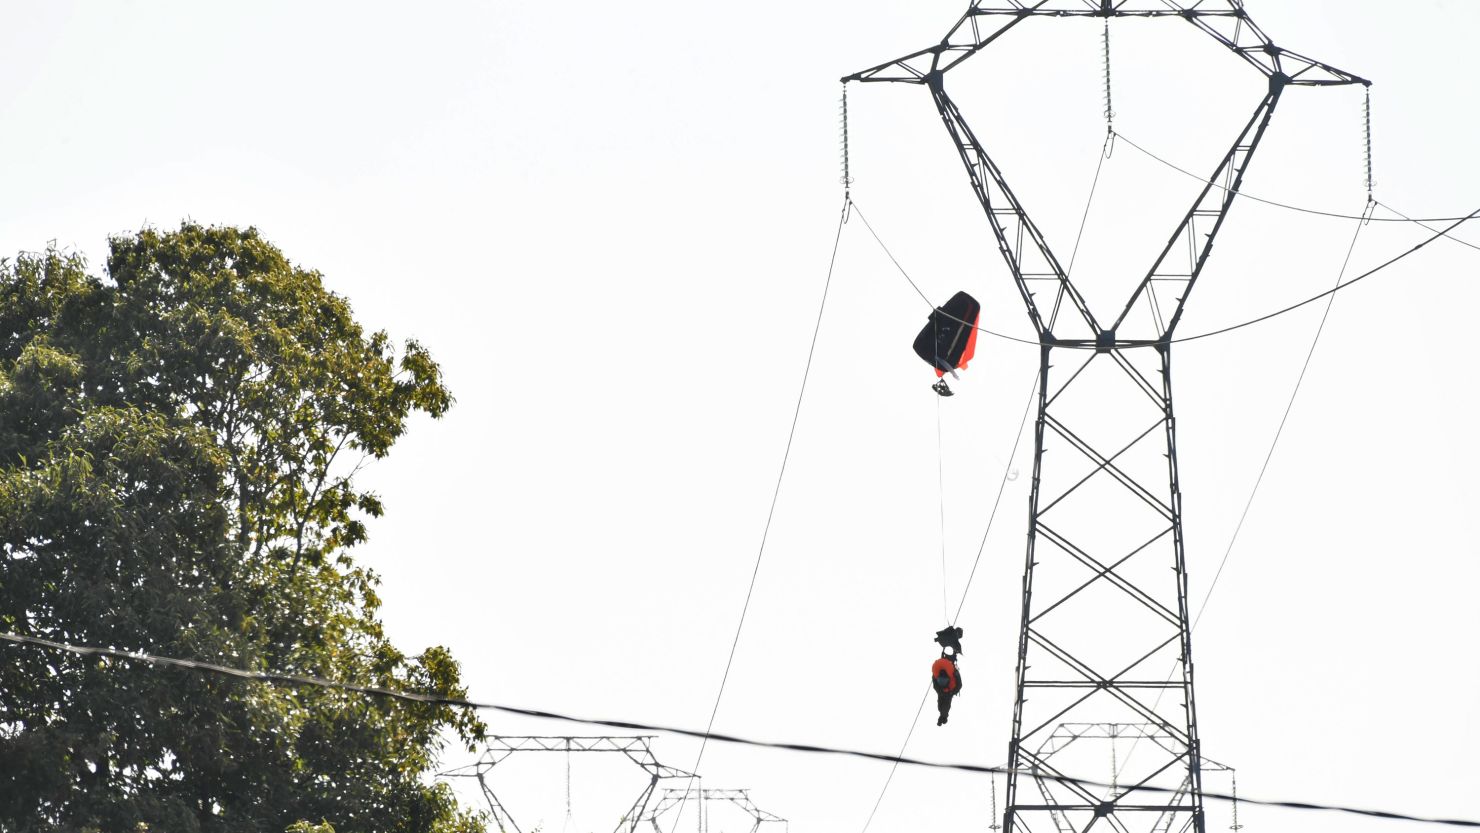 One pilot was caught on a high-voltage electricity line in north-western France before being rescued by emergency services.